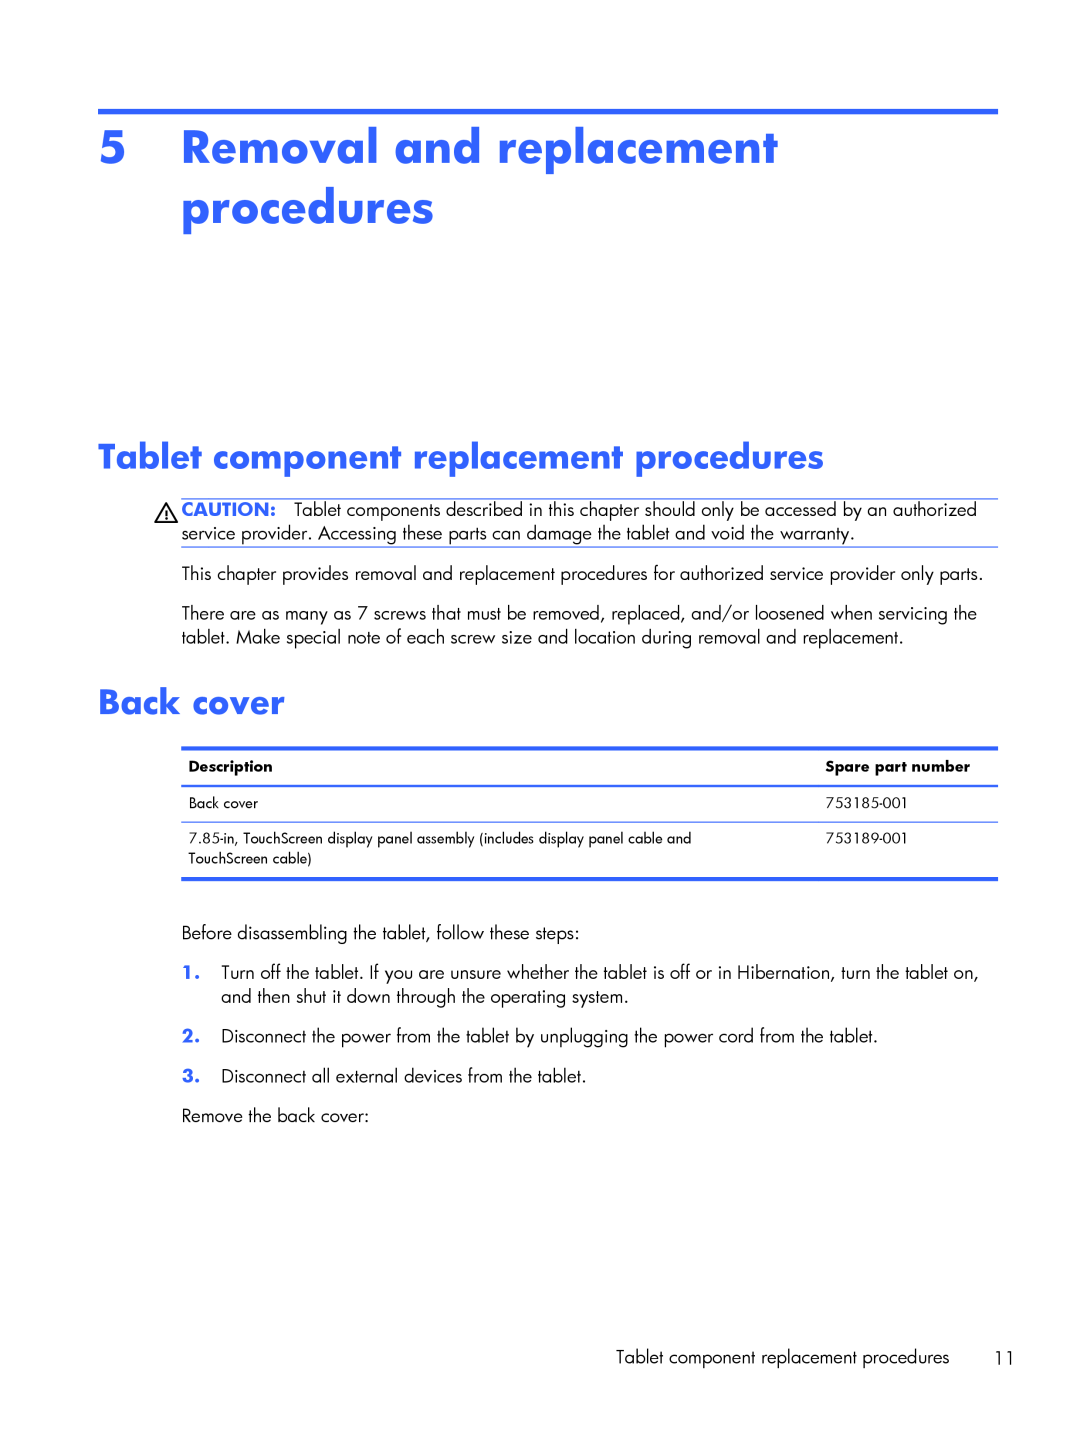 HP 8 1400 manual Removal and replacement procedures, Tablet component replacement procedures, Back cover 